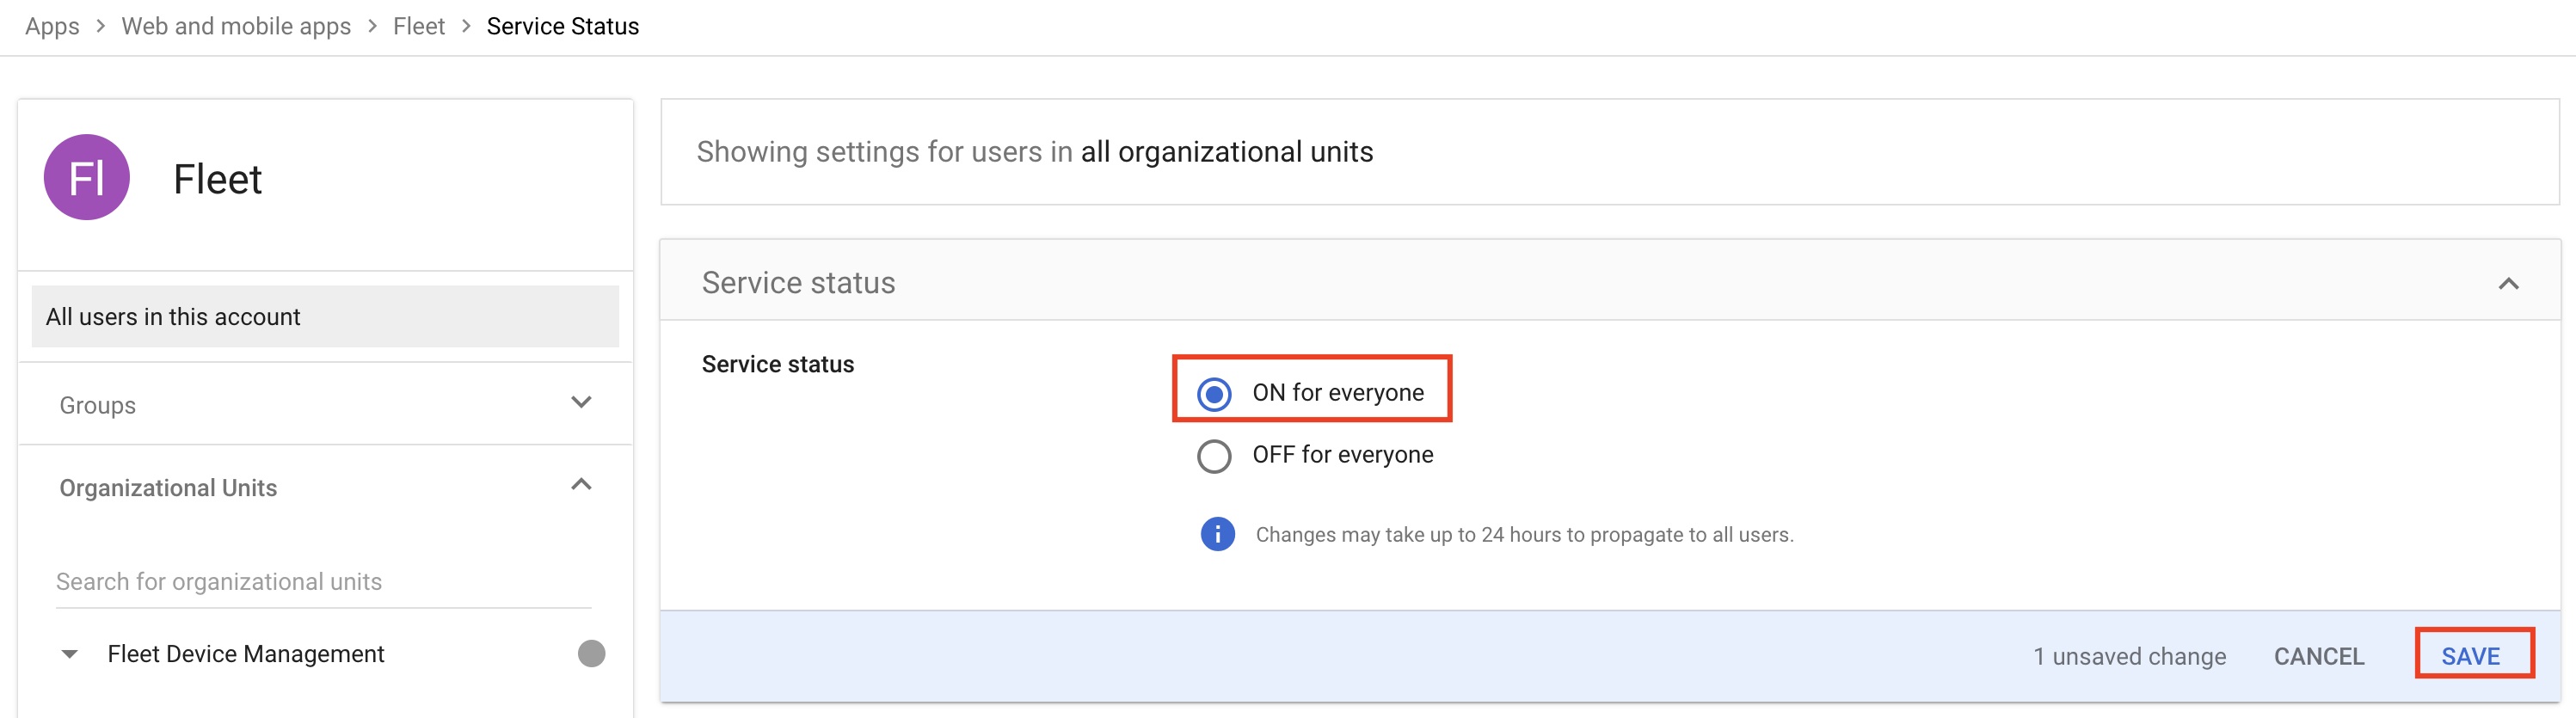 The new SAML app's service status page in Google Workspace